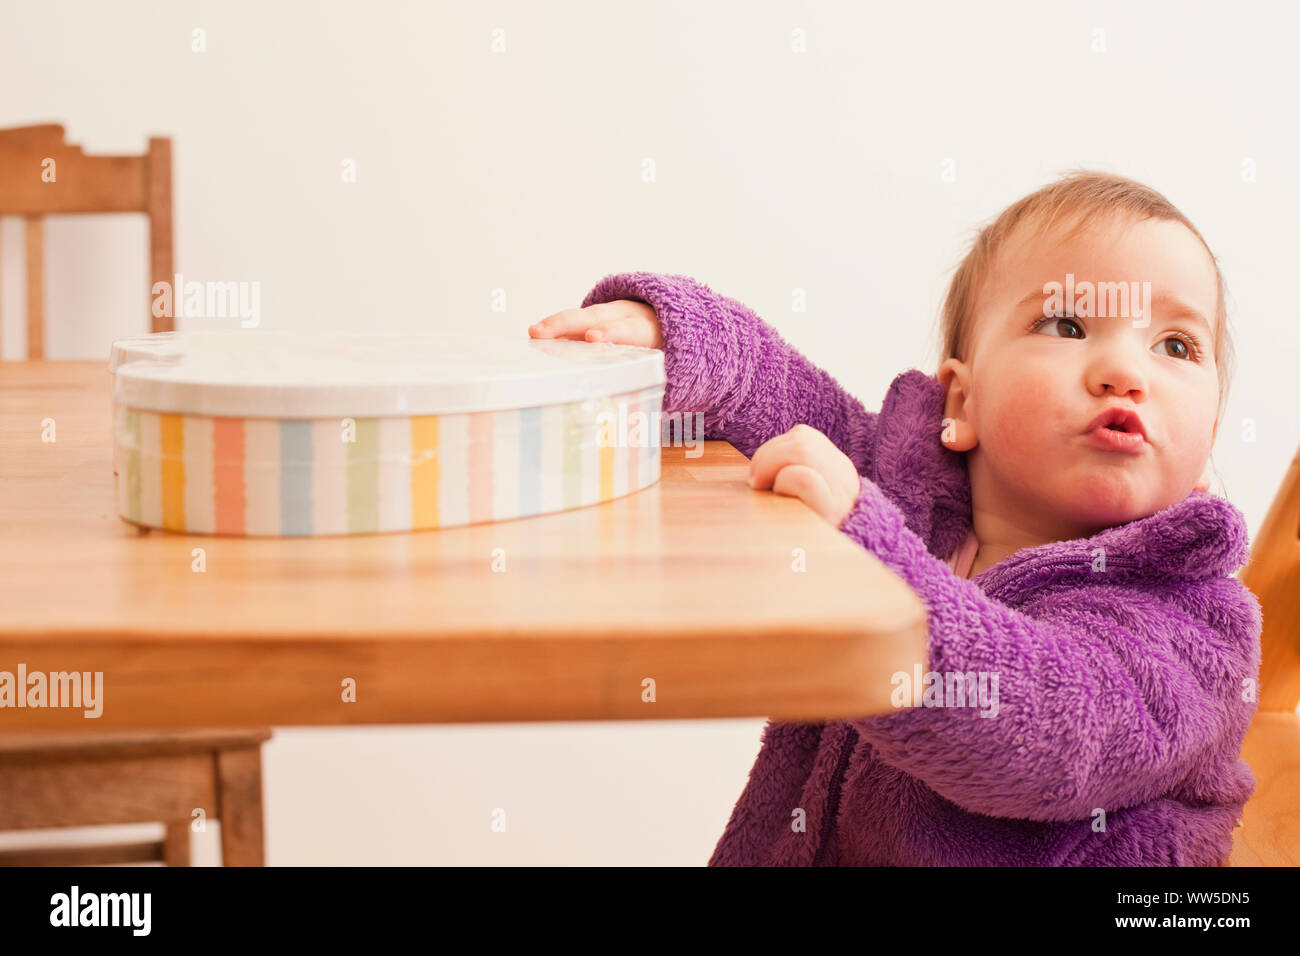 1-3 years old girl with purple wool jacket standing at the table with present Stock Photo